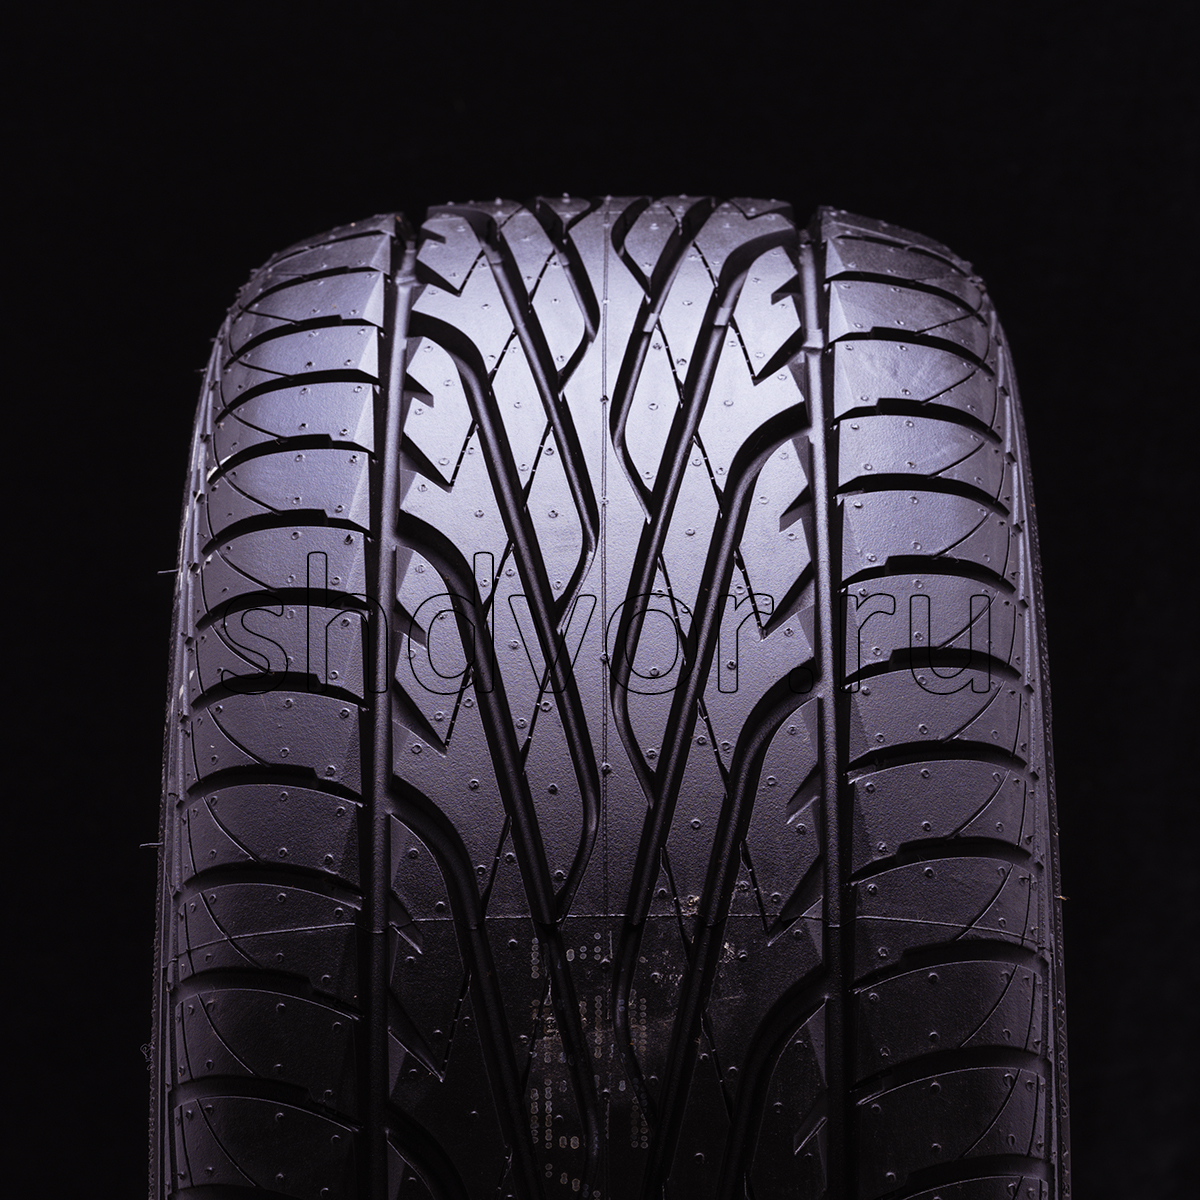 Шины максис виктра. Шины Максис Victra ma-z3. Maxxis ma-z3 Victra 195/50 r15. Летняя шина Maxxis Victra ma-z3.. 215/50r17, Maxxis ma-z3 Victra 91w.